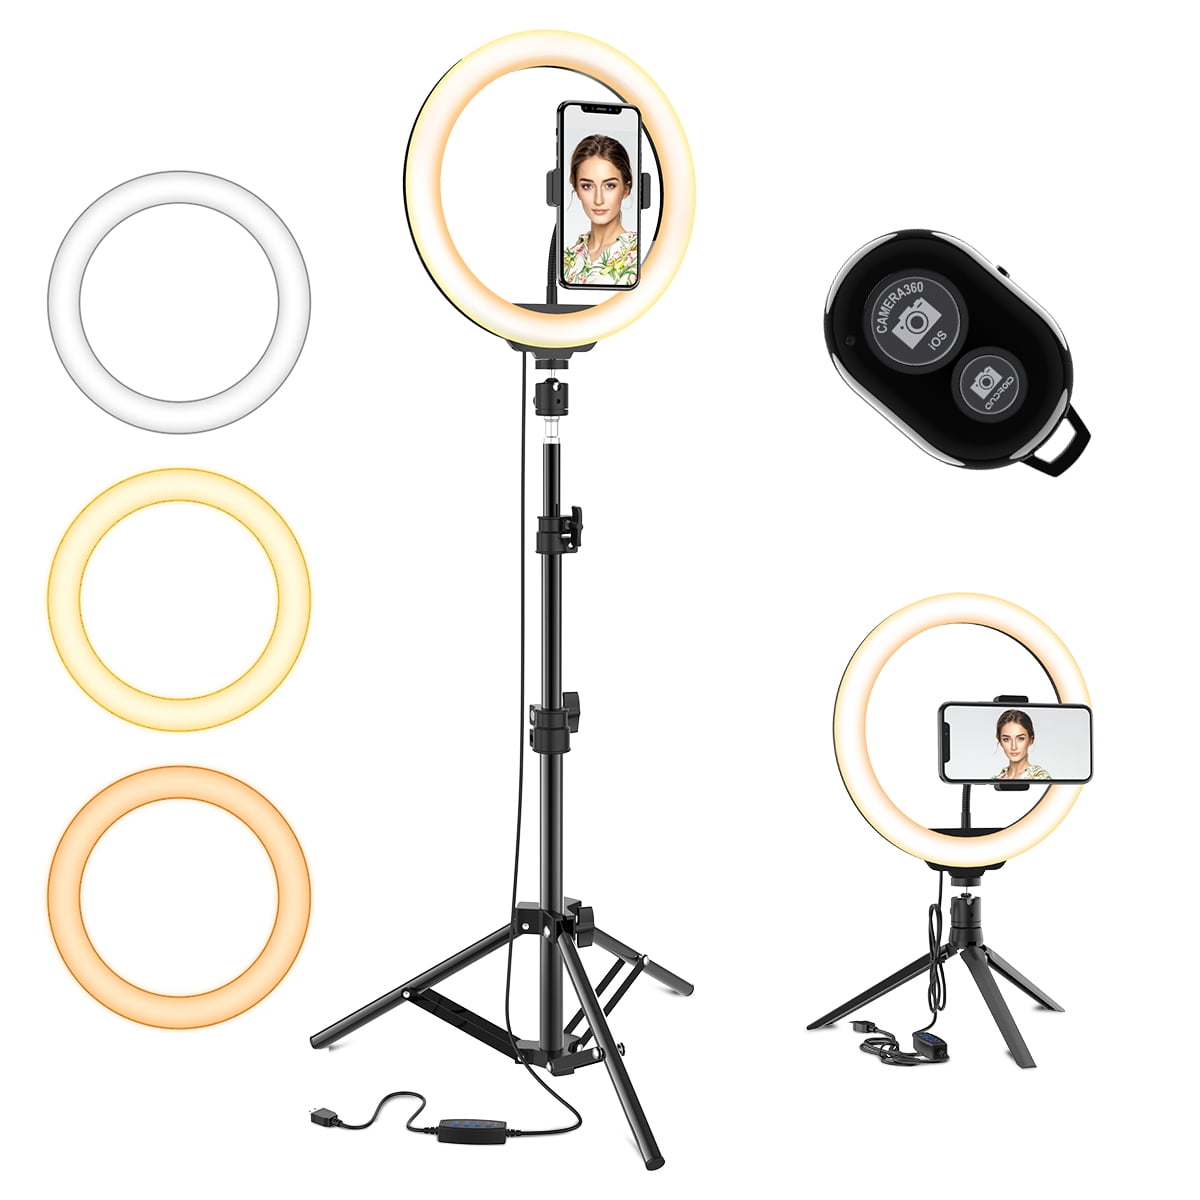 LED Ring Light 10 with Tripod Stand and Phone Holder for Selfie Video Ring Lamp for Photography with 3 Light Modes /& 10 Brightness Level /& Bluetooth Remote